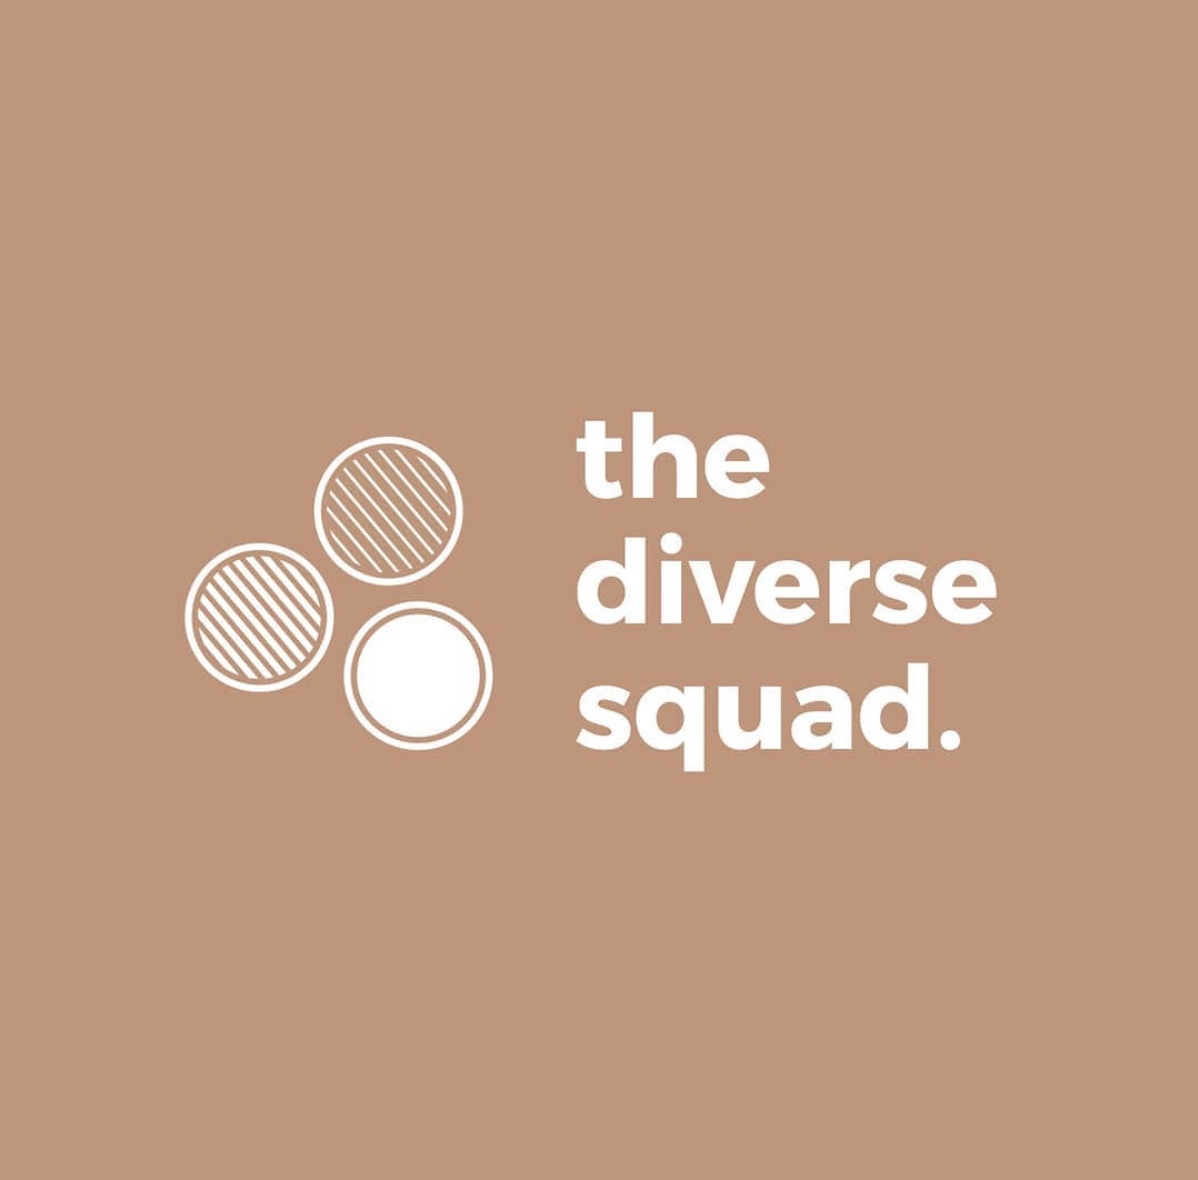 Just launched: @thediversesquad